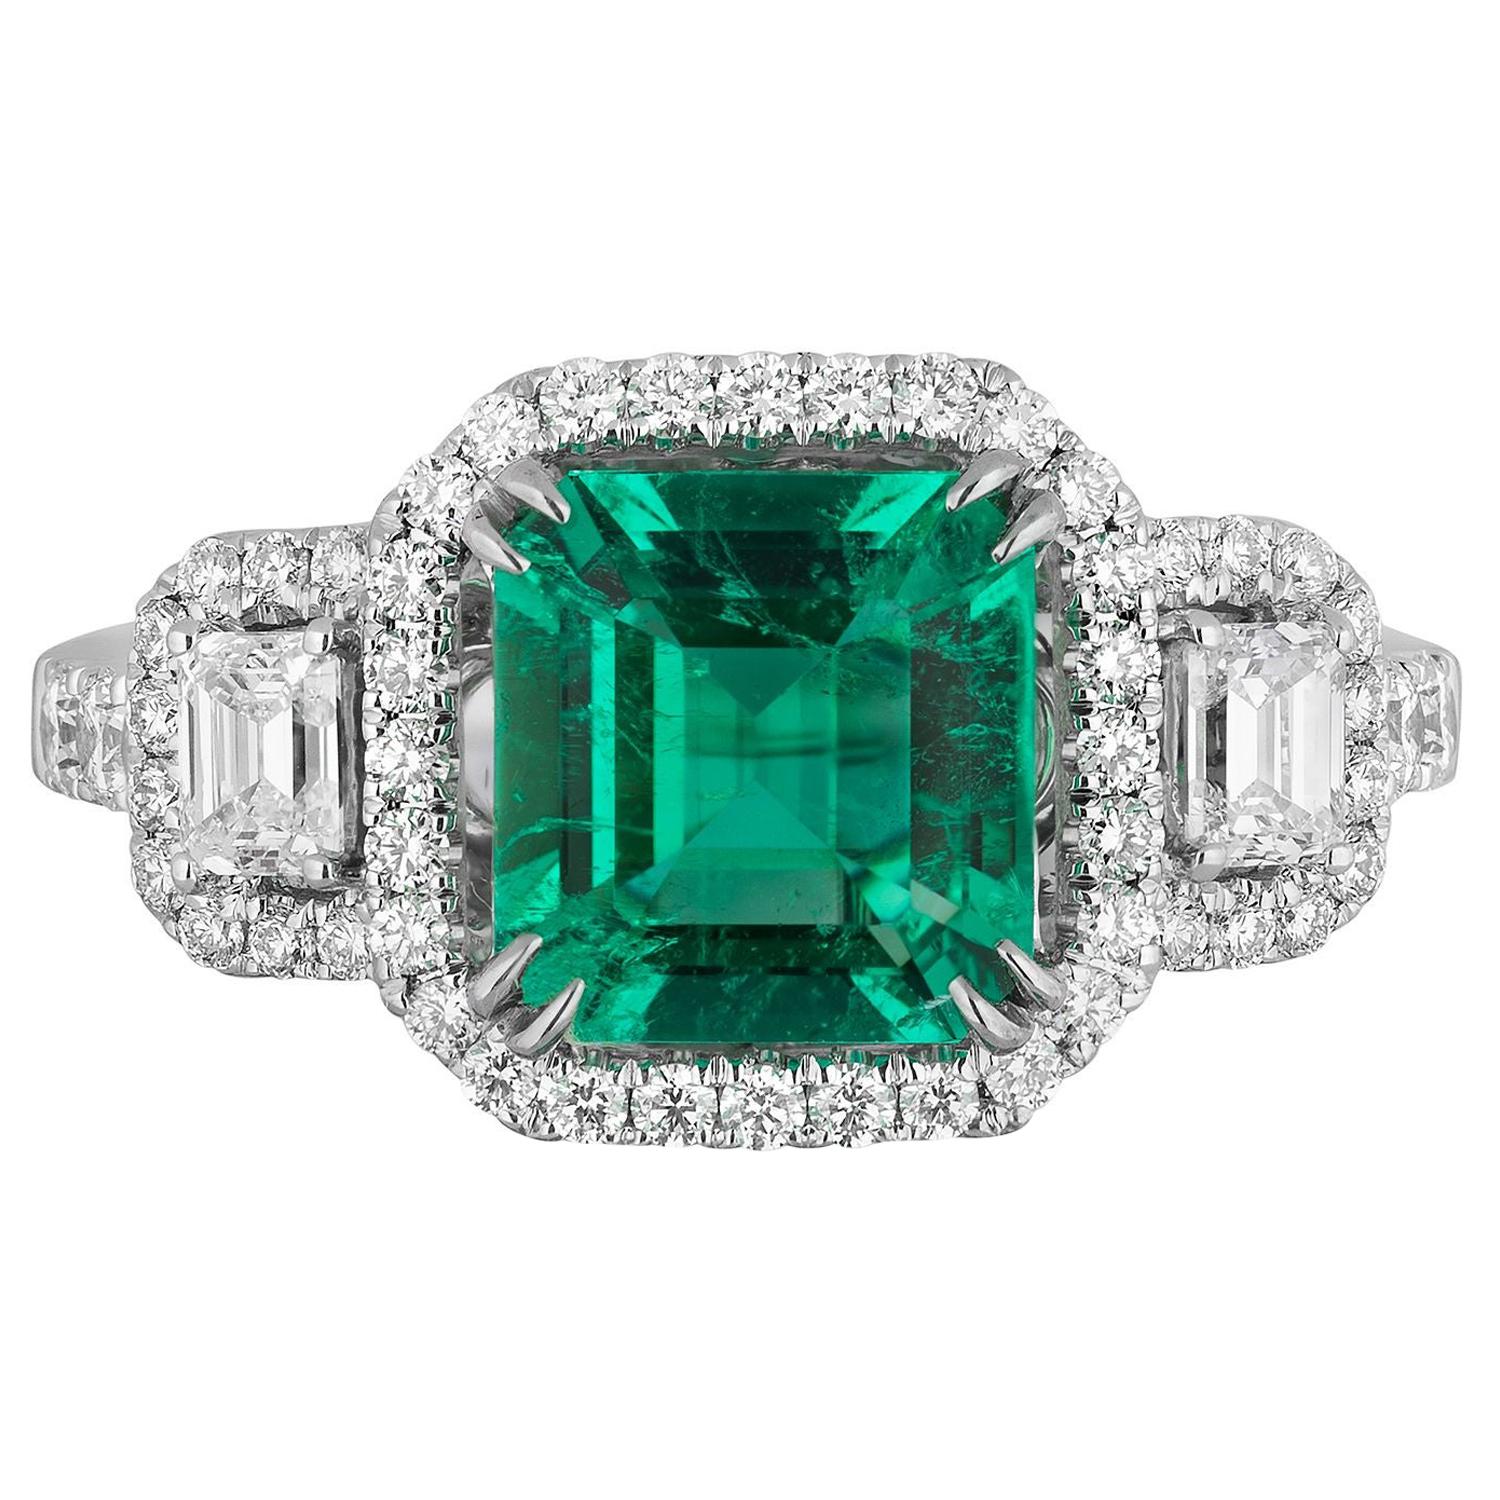 1.75 Carat Colombian Emerald Diamond Cocktail Ring For Sale